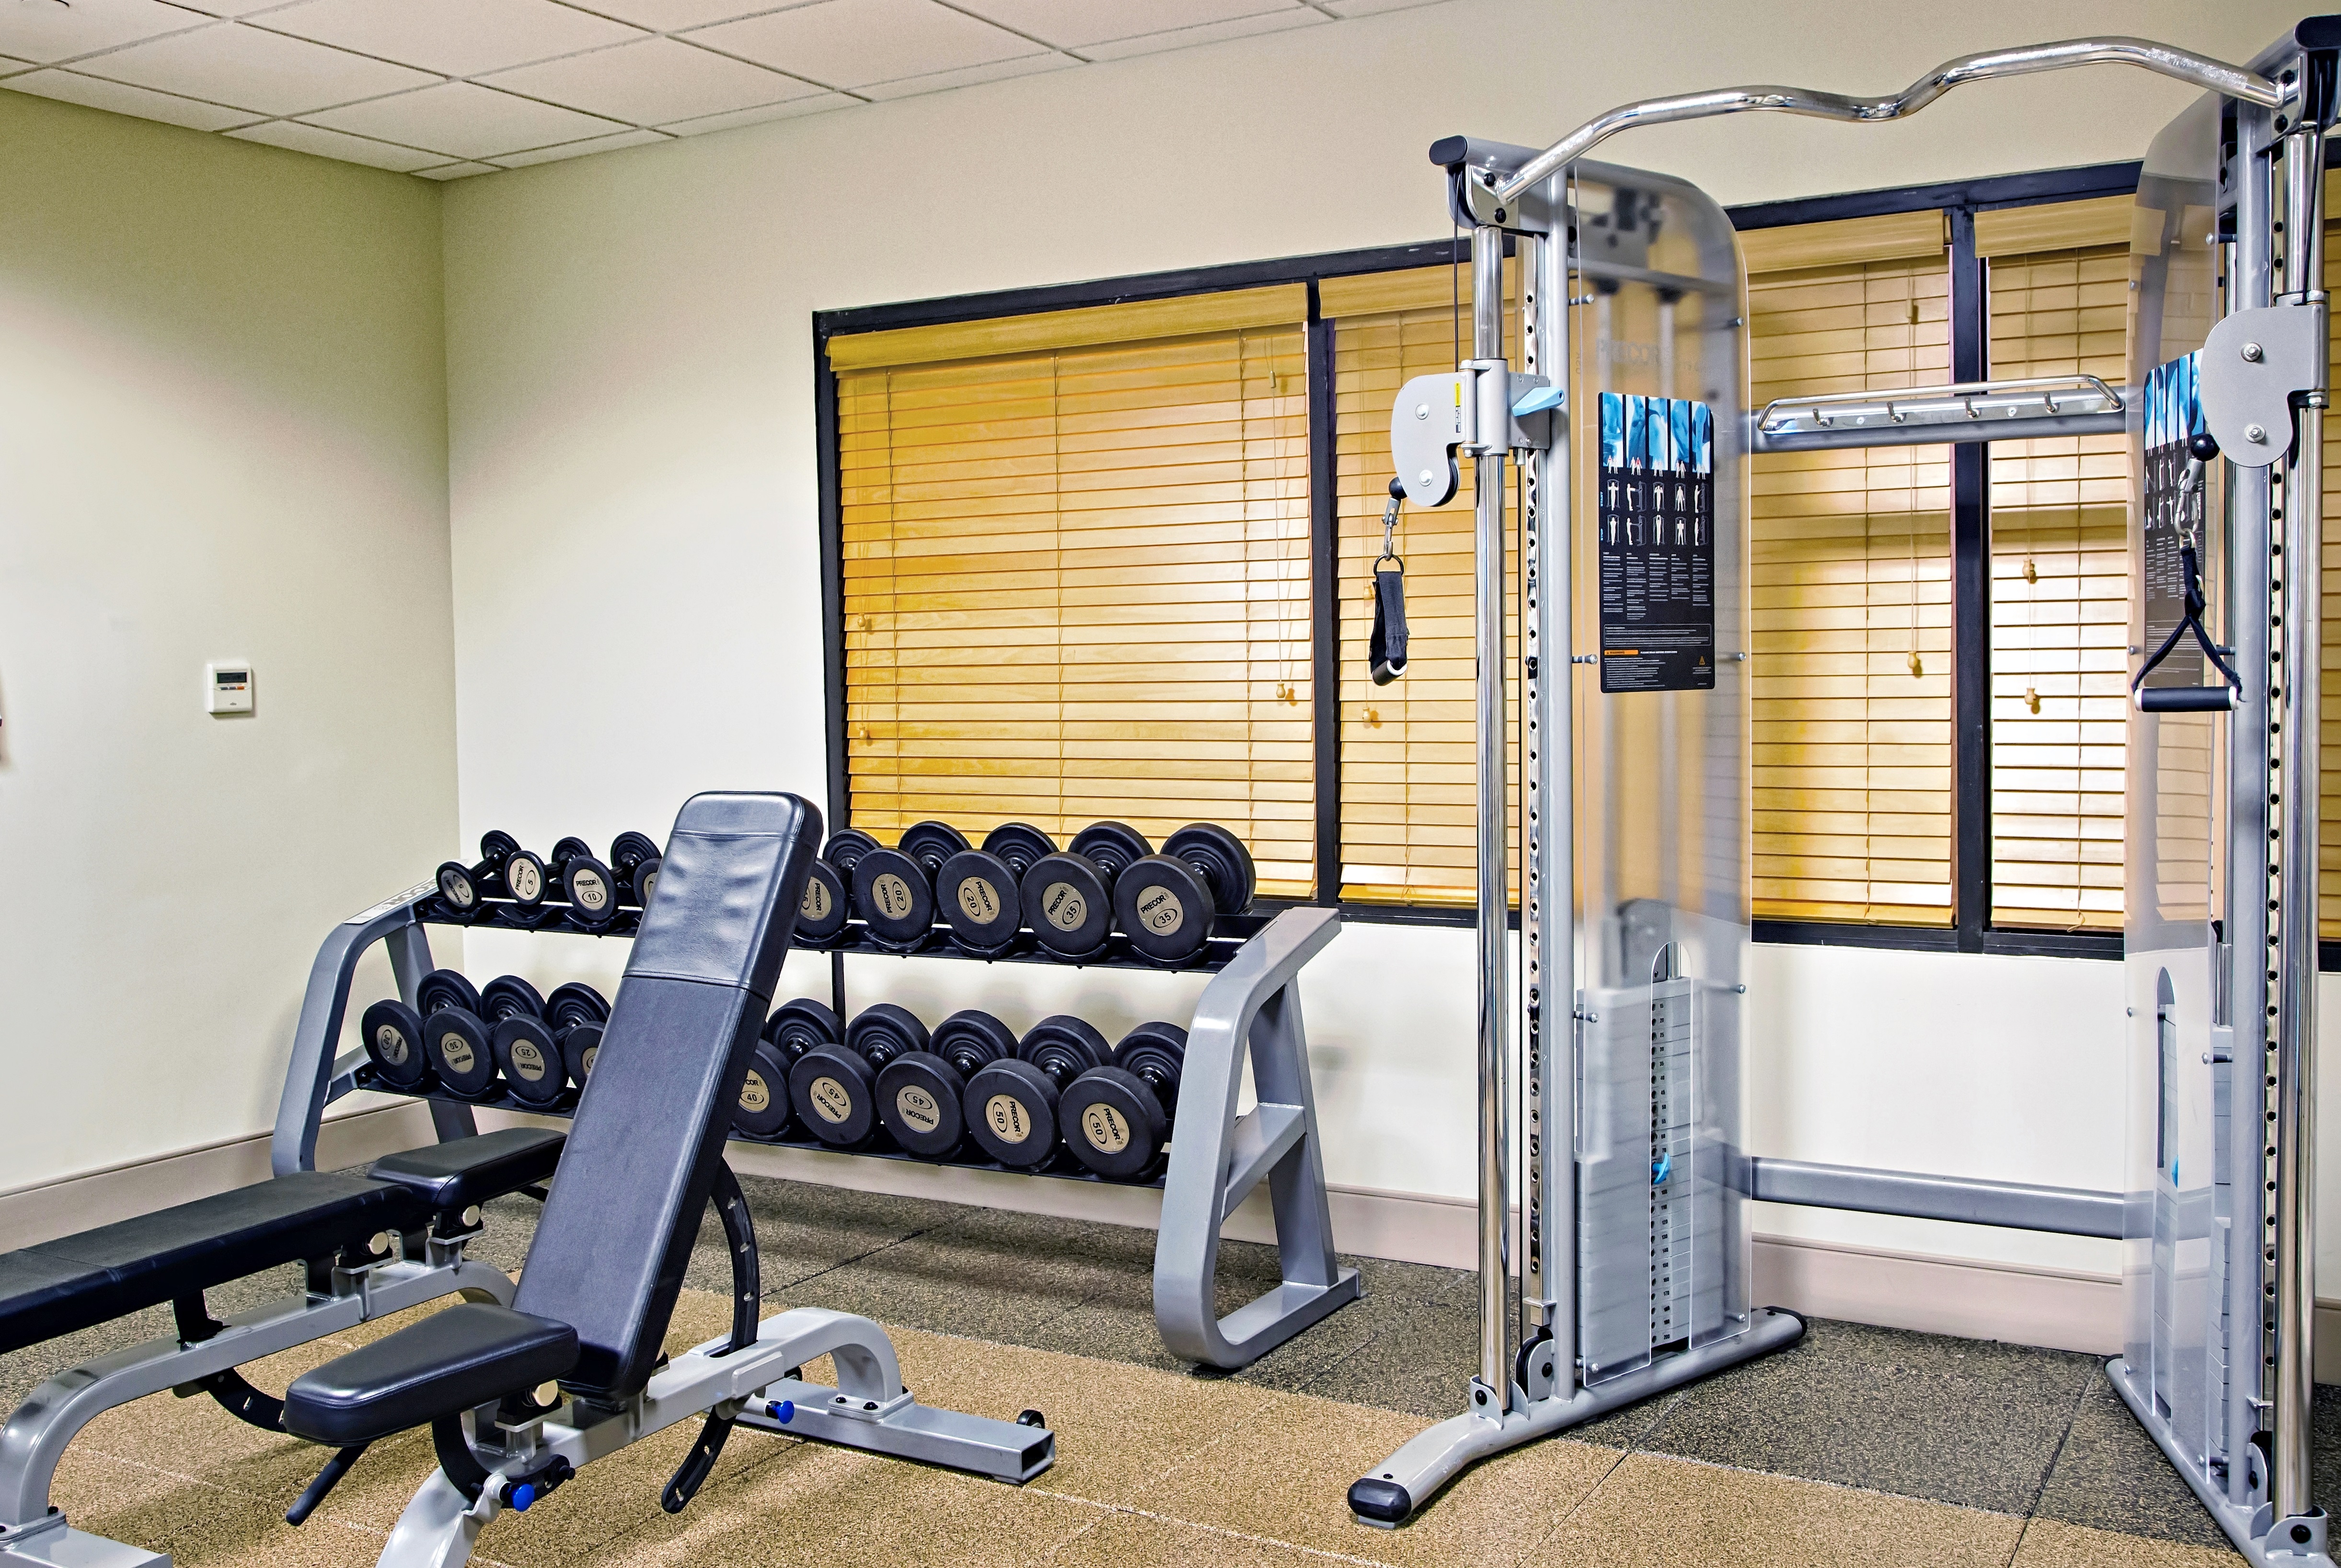 Fitness Center with Weight Bench, Dumbbell Rack and Weight Machine